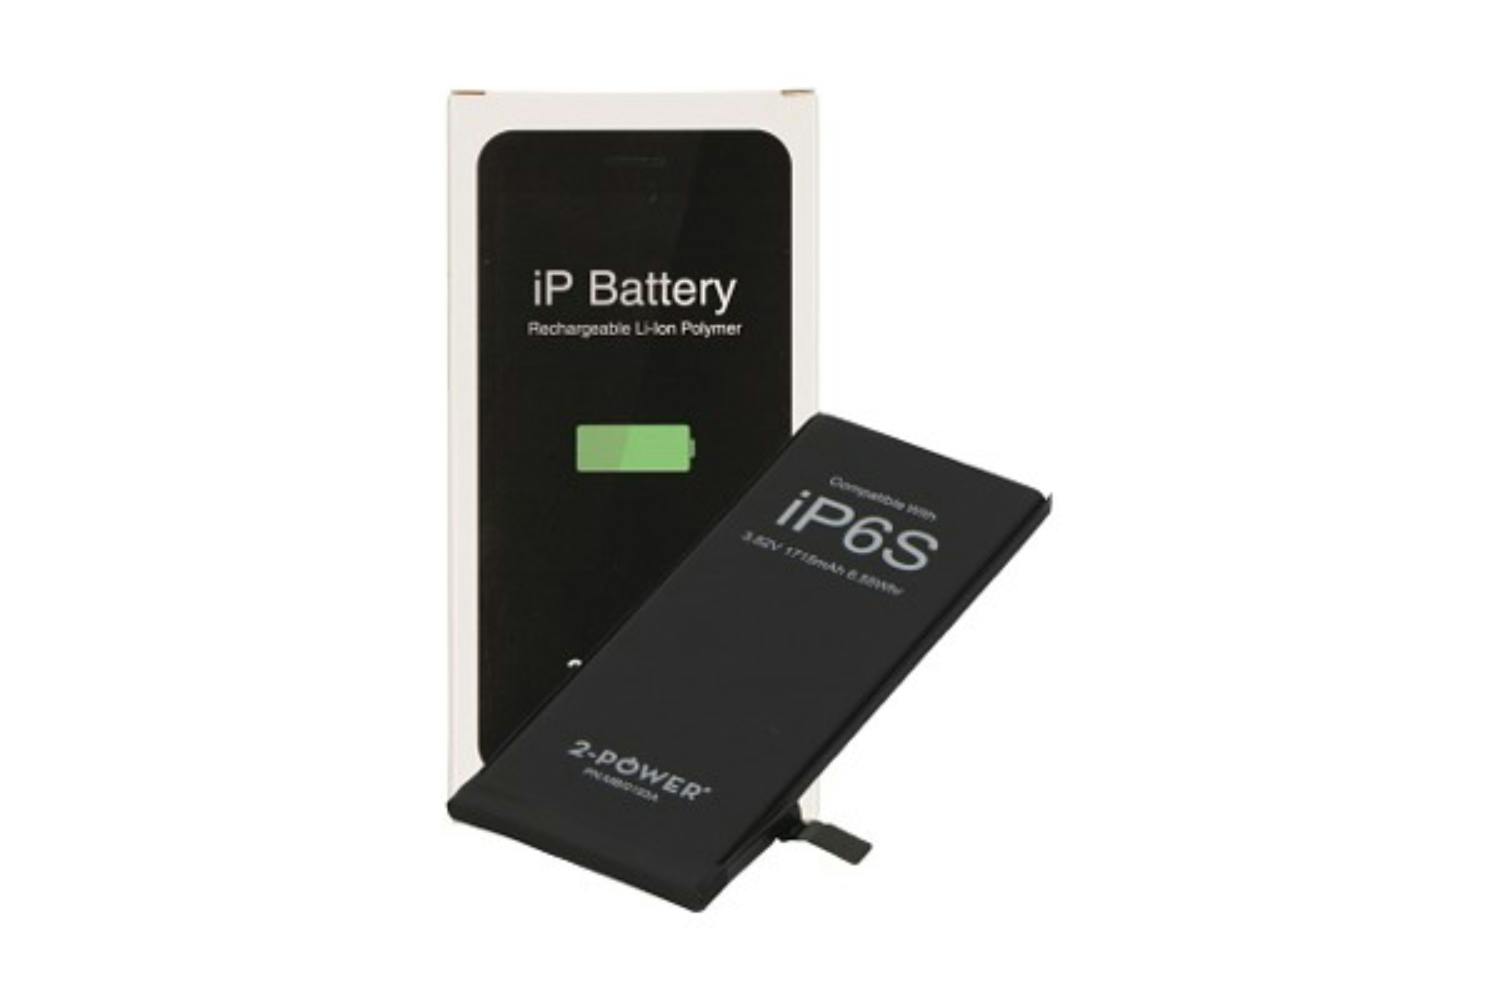 2-Power MBI0193AW 1715mAh Replacement iPhone Battery